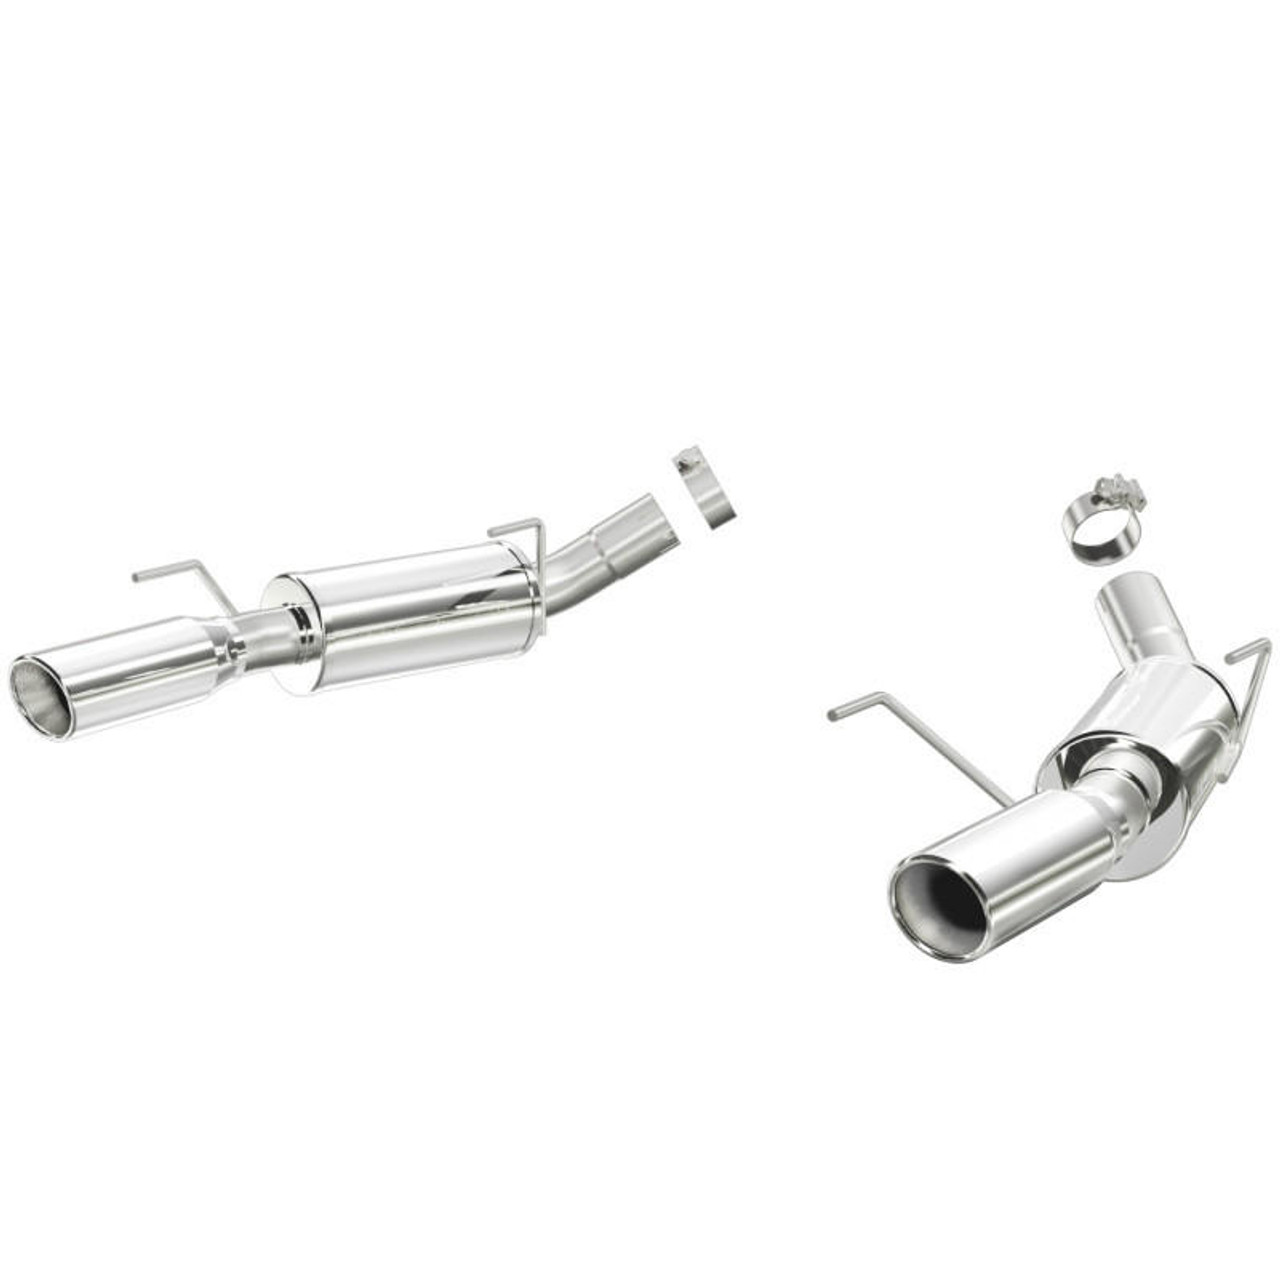 Magnaflow MagnaFlow Sys C/B 05-09 Mustang M-pack axle-bac - 16793 